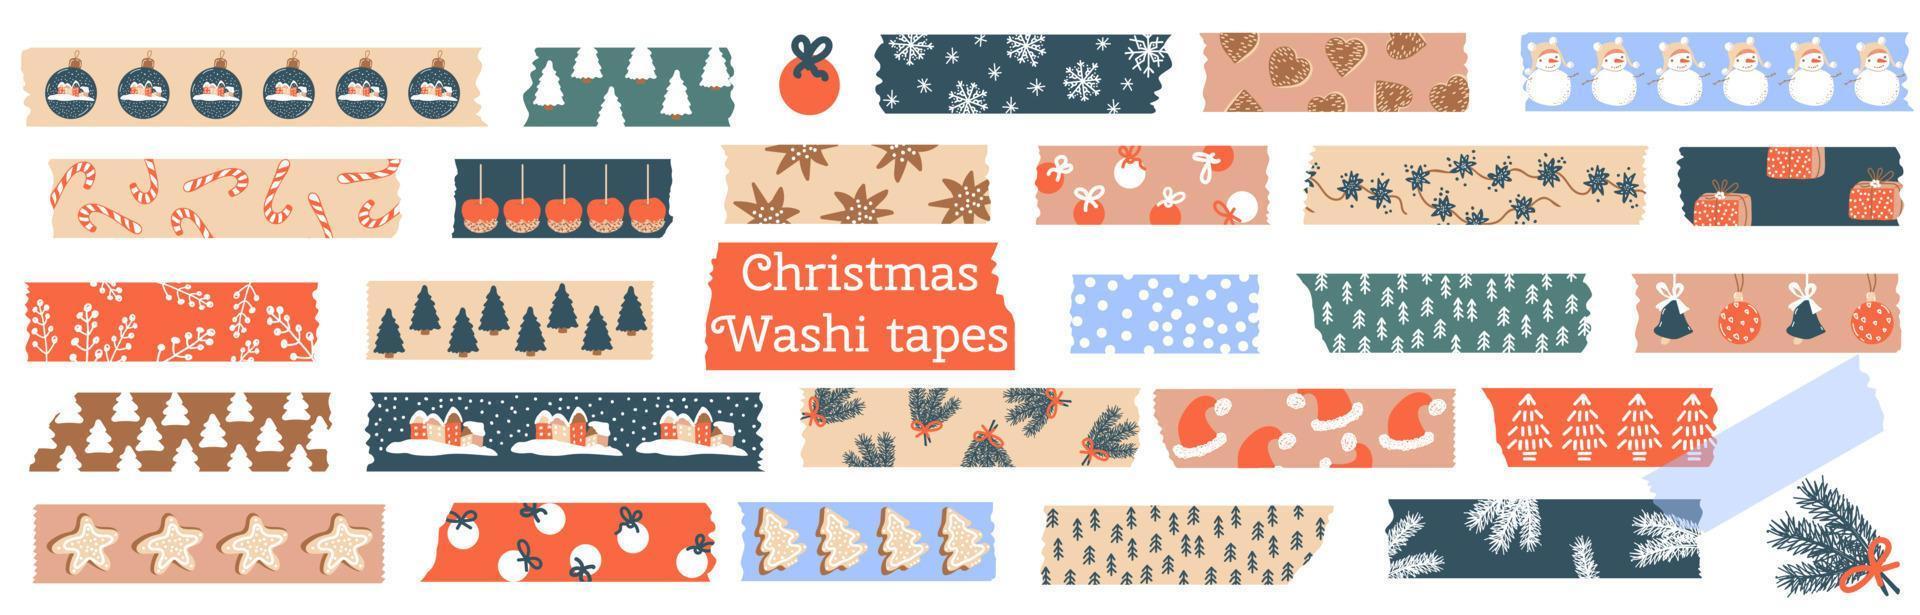 Christmas Washi tapes. Set with snowflakes, gingerbread, spruce, winter elements. Masking tape or  adhesive strips for frames, scrapbooking, borders, web graphics, crafts, stickers. Vector